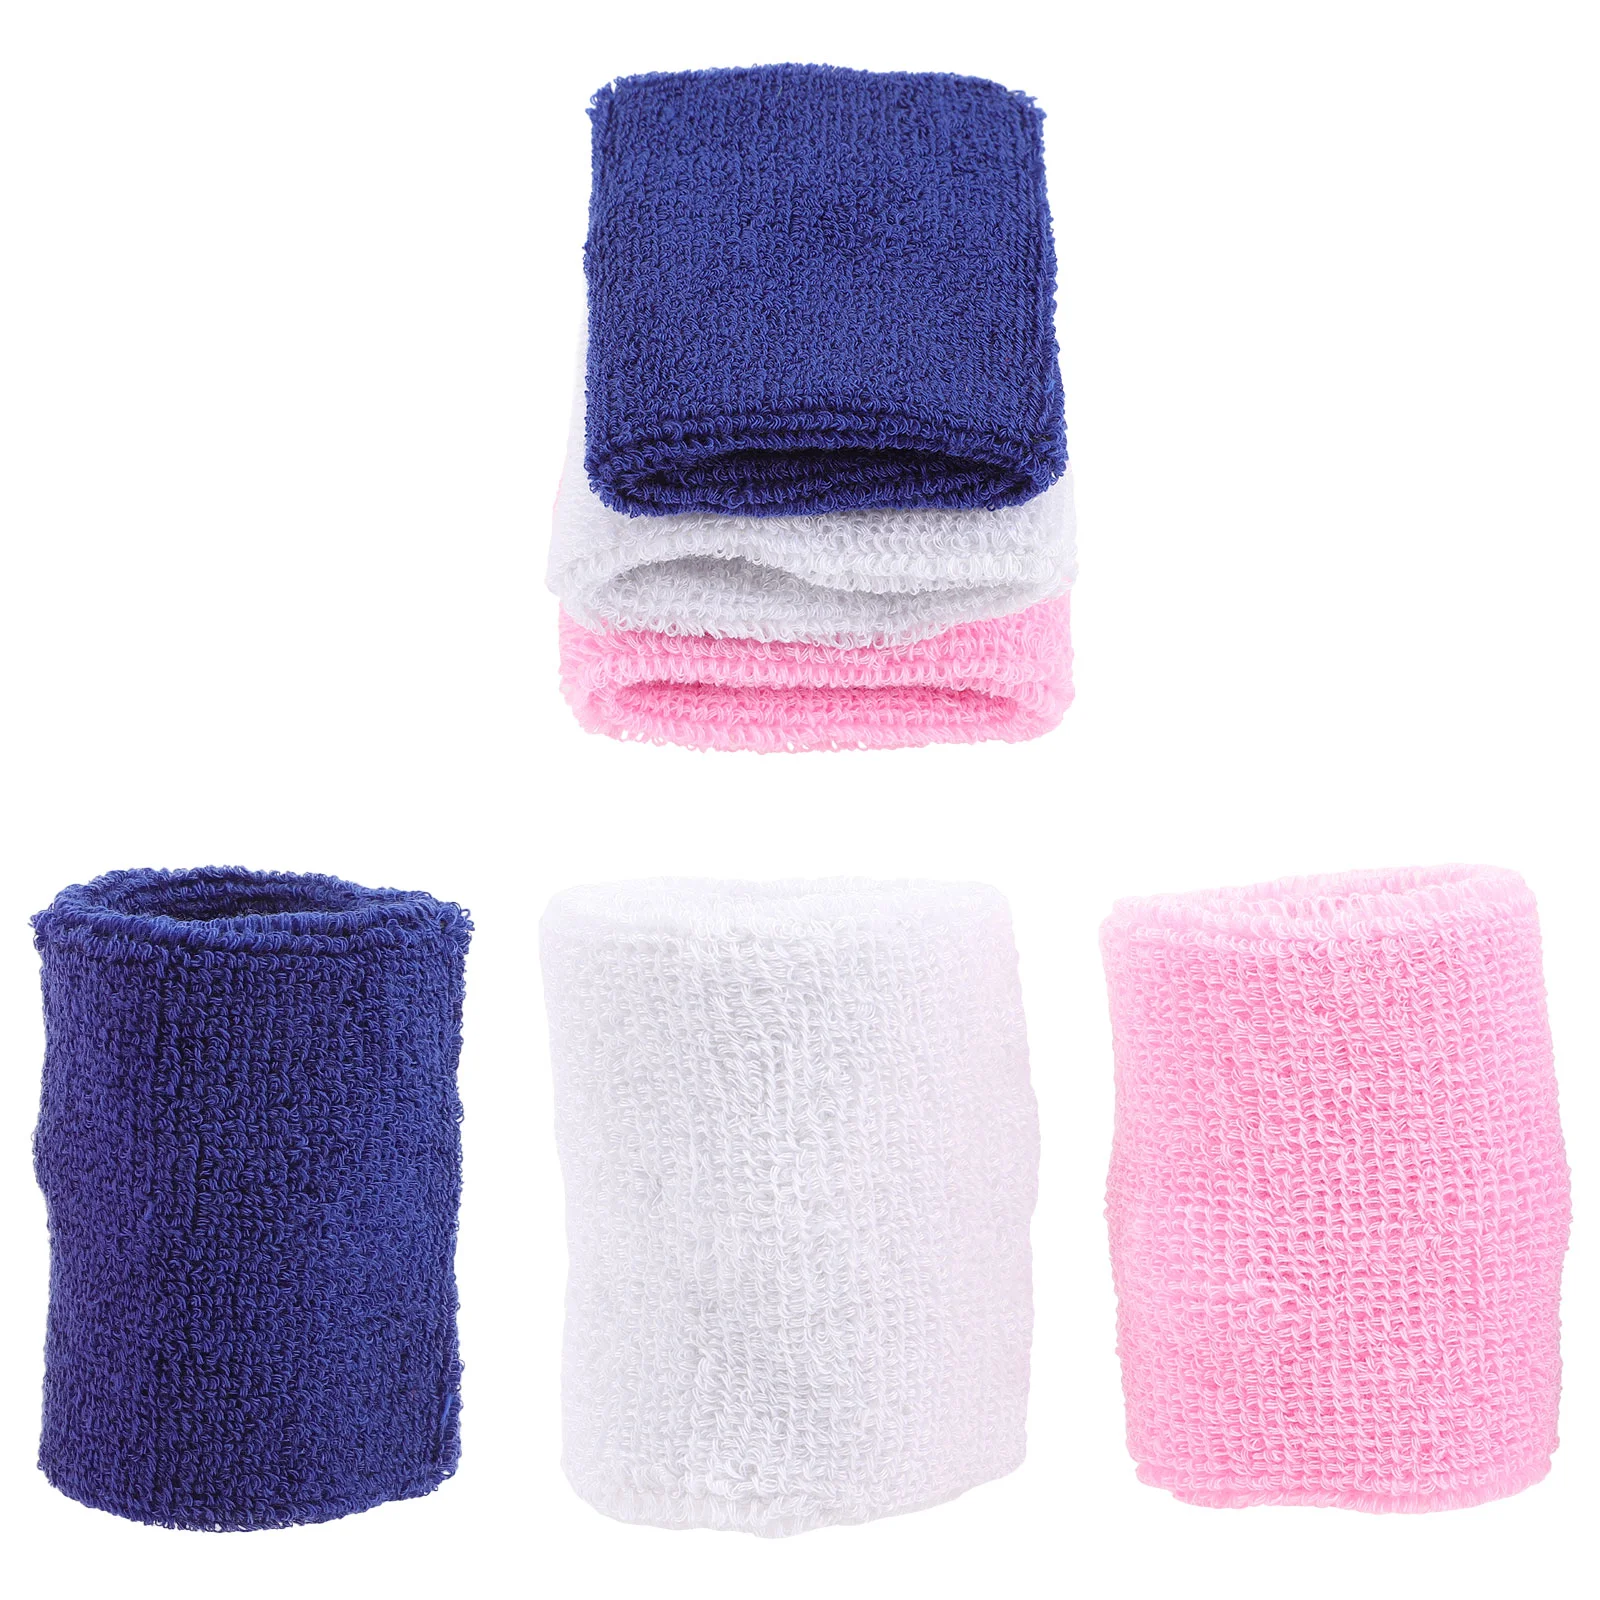 

Children's Wristband Sweat Bands for Wrists Wristbands Sports Sweatband Kids Sweatbands Soccer Ball